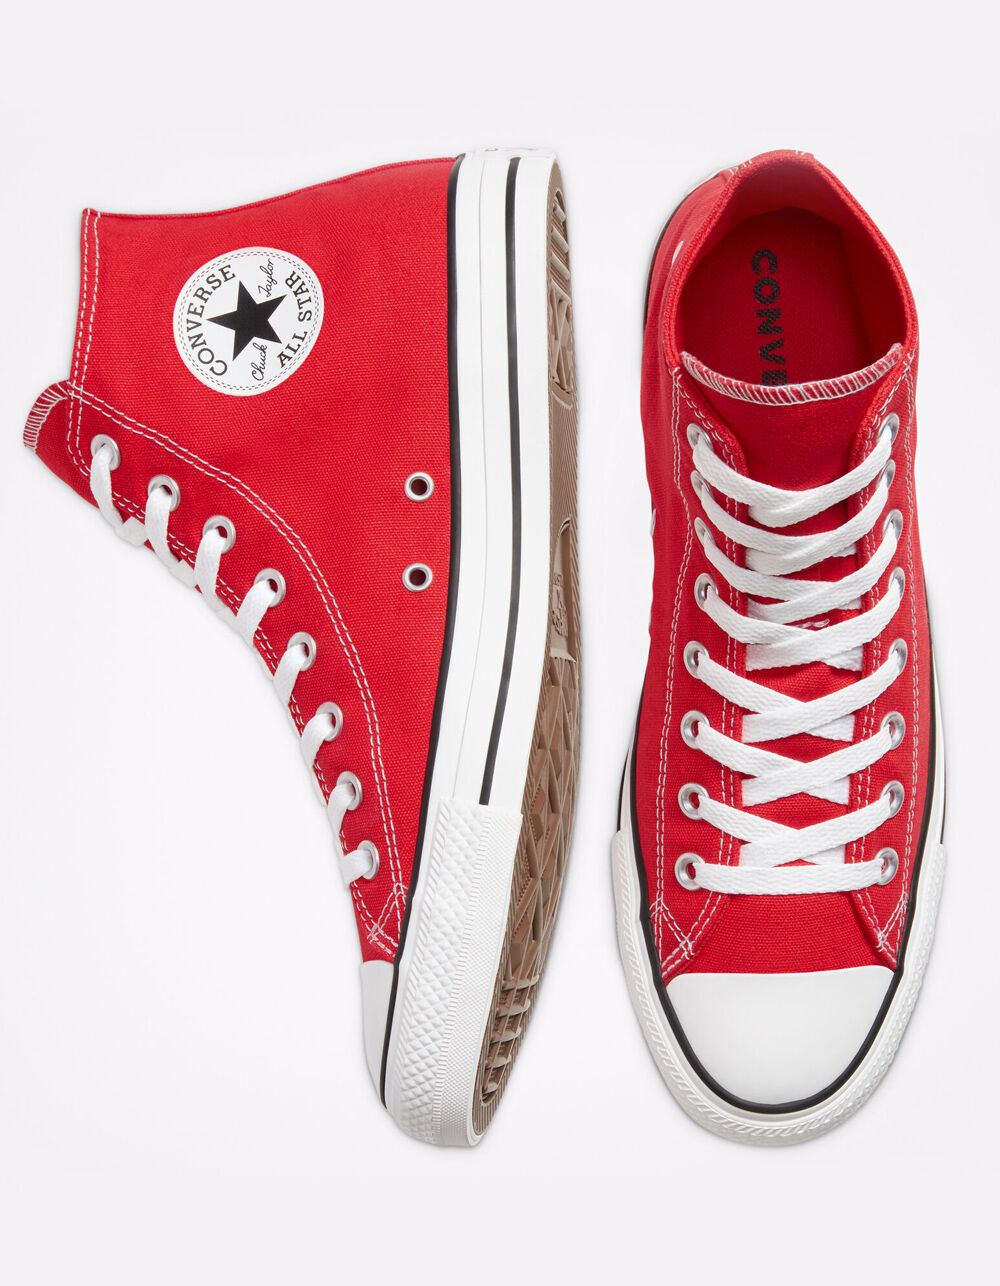 CONVERSE Cheerful Chuck Taylor All Star Red High Top Shoes - RED | Tillys